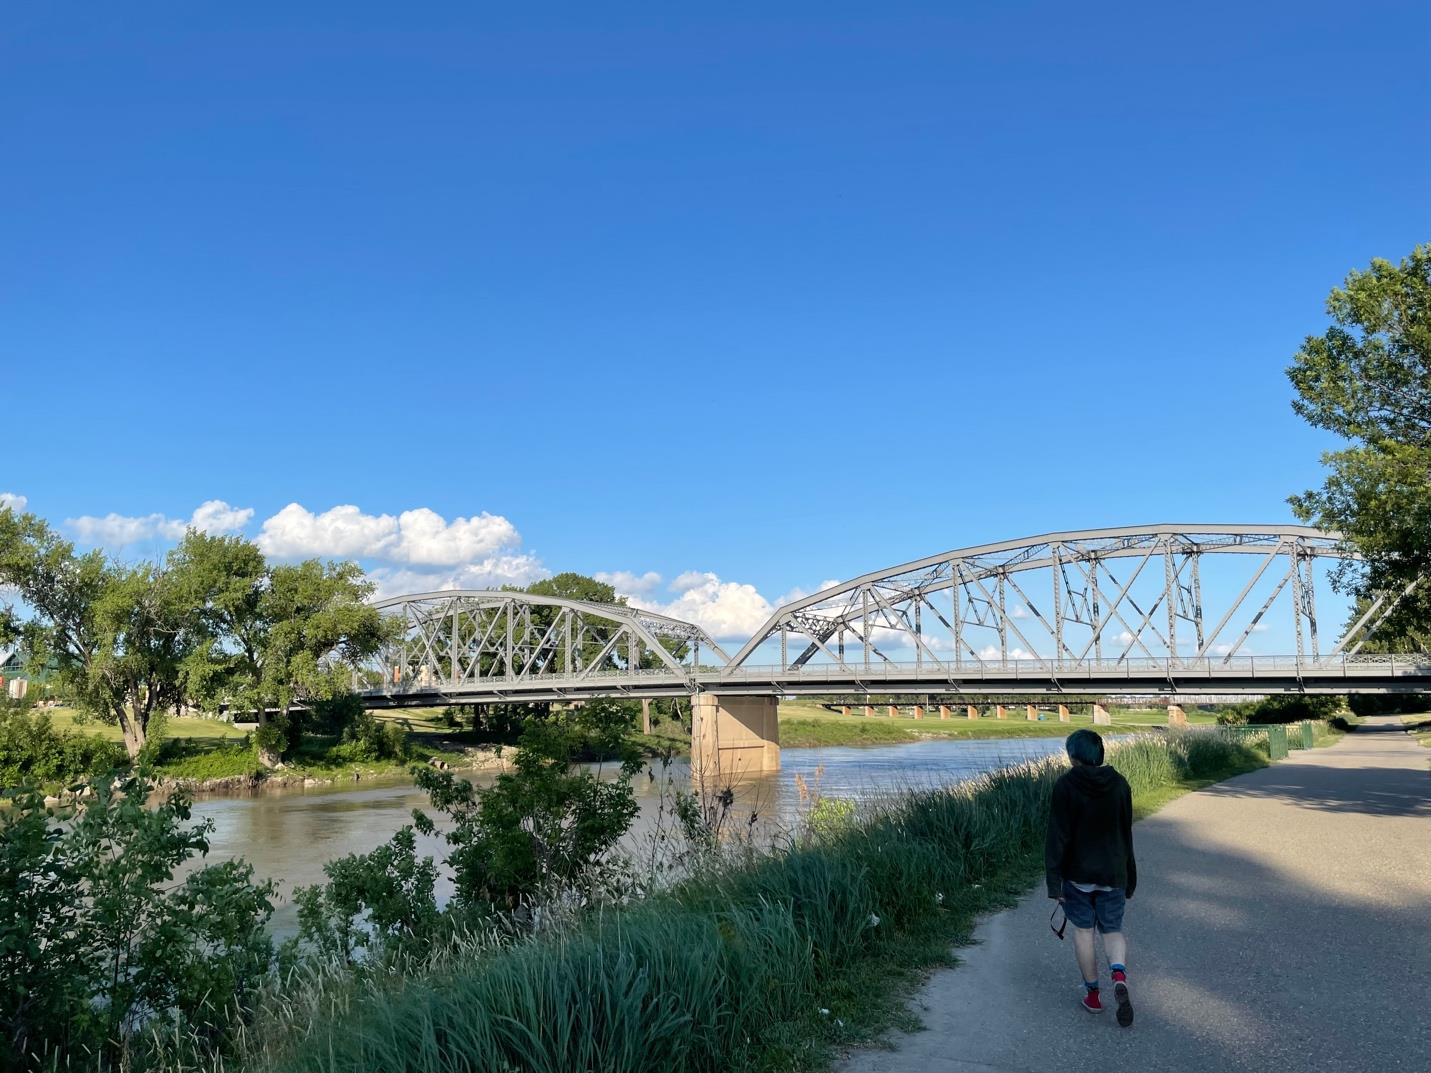 One of the bridges over the Red River in Grand Forks, ND. Behind the bridge is a brilliant blue sky with a few clouds hovering nearer the horizon. In the foreground, a person is walking along a path toward the bridge. 